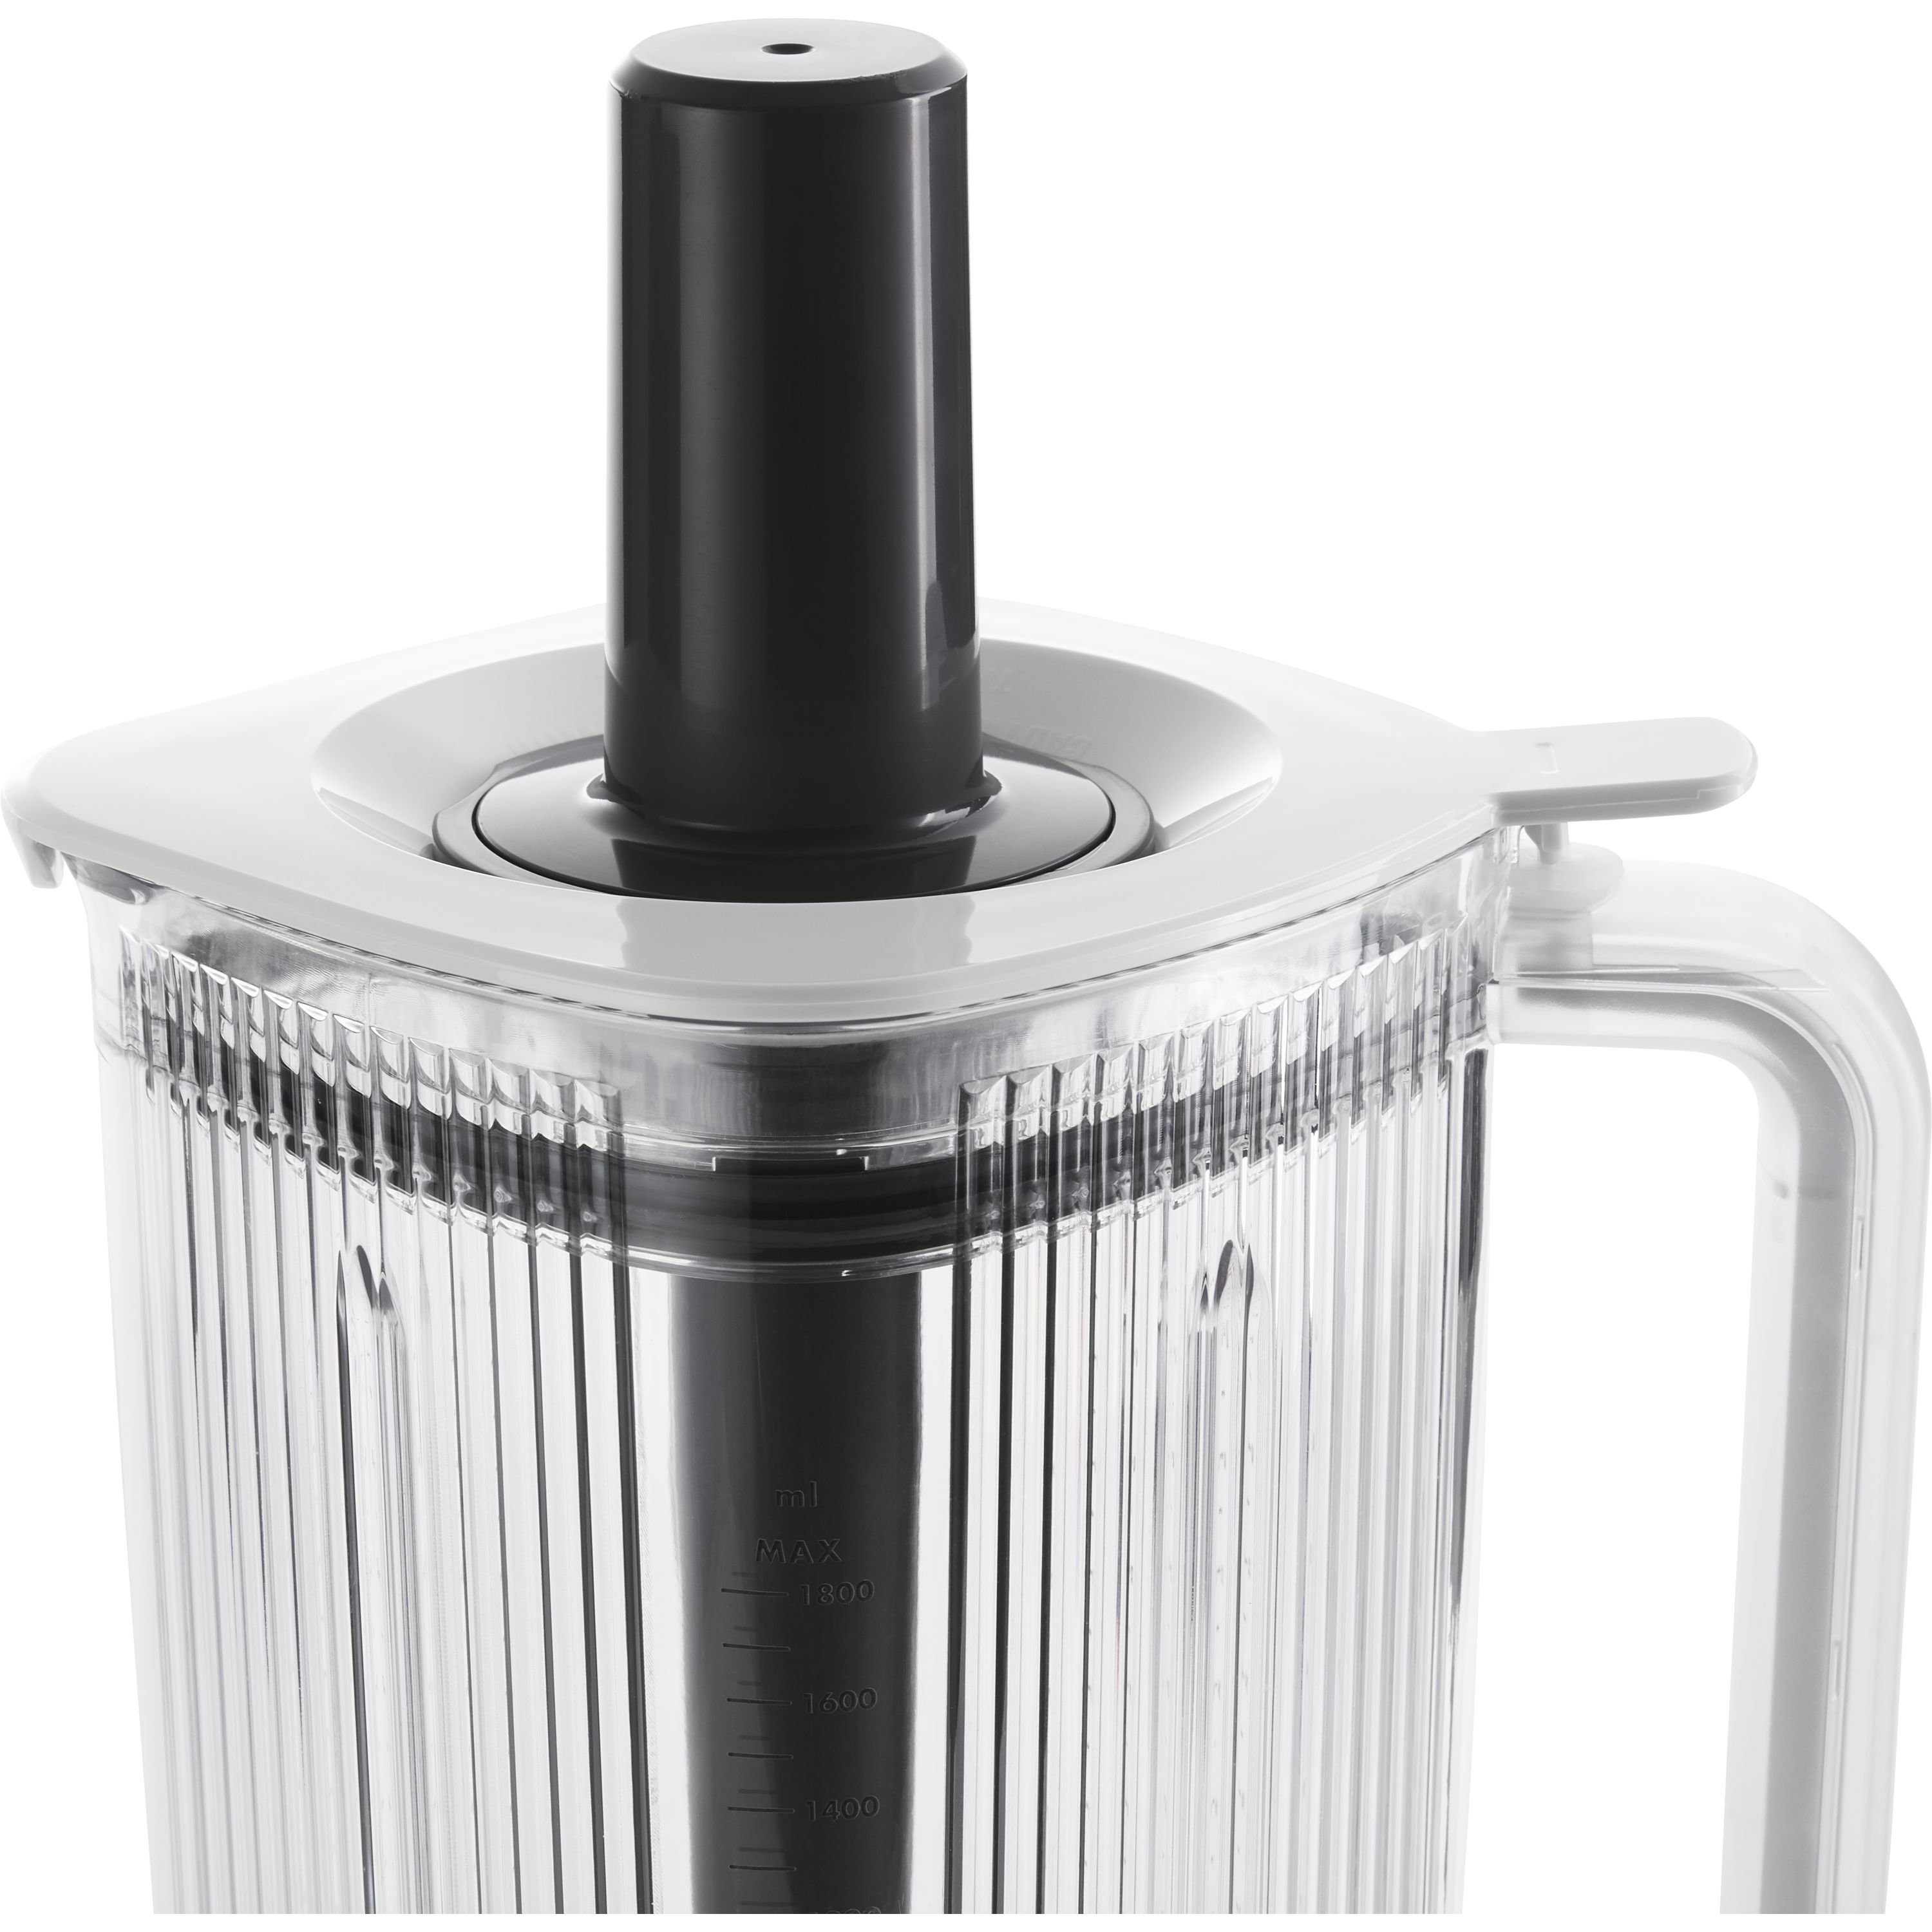 Buy ZWILLING Enfinigy Blender accessories